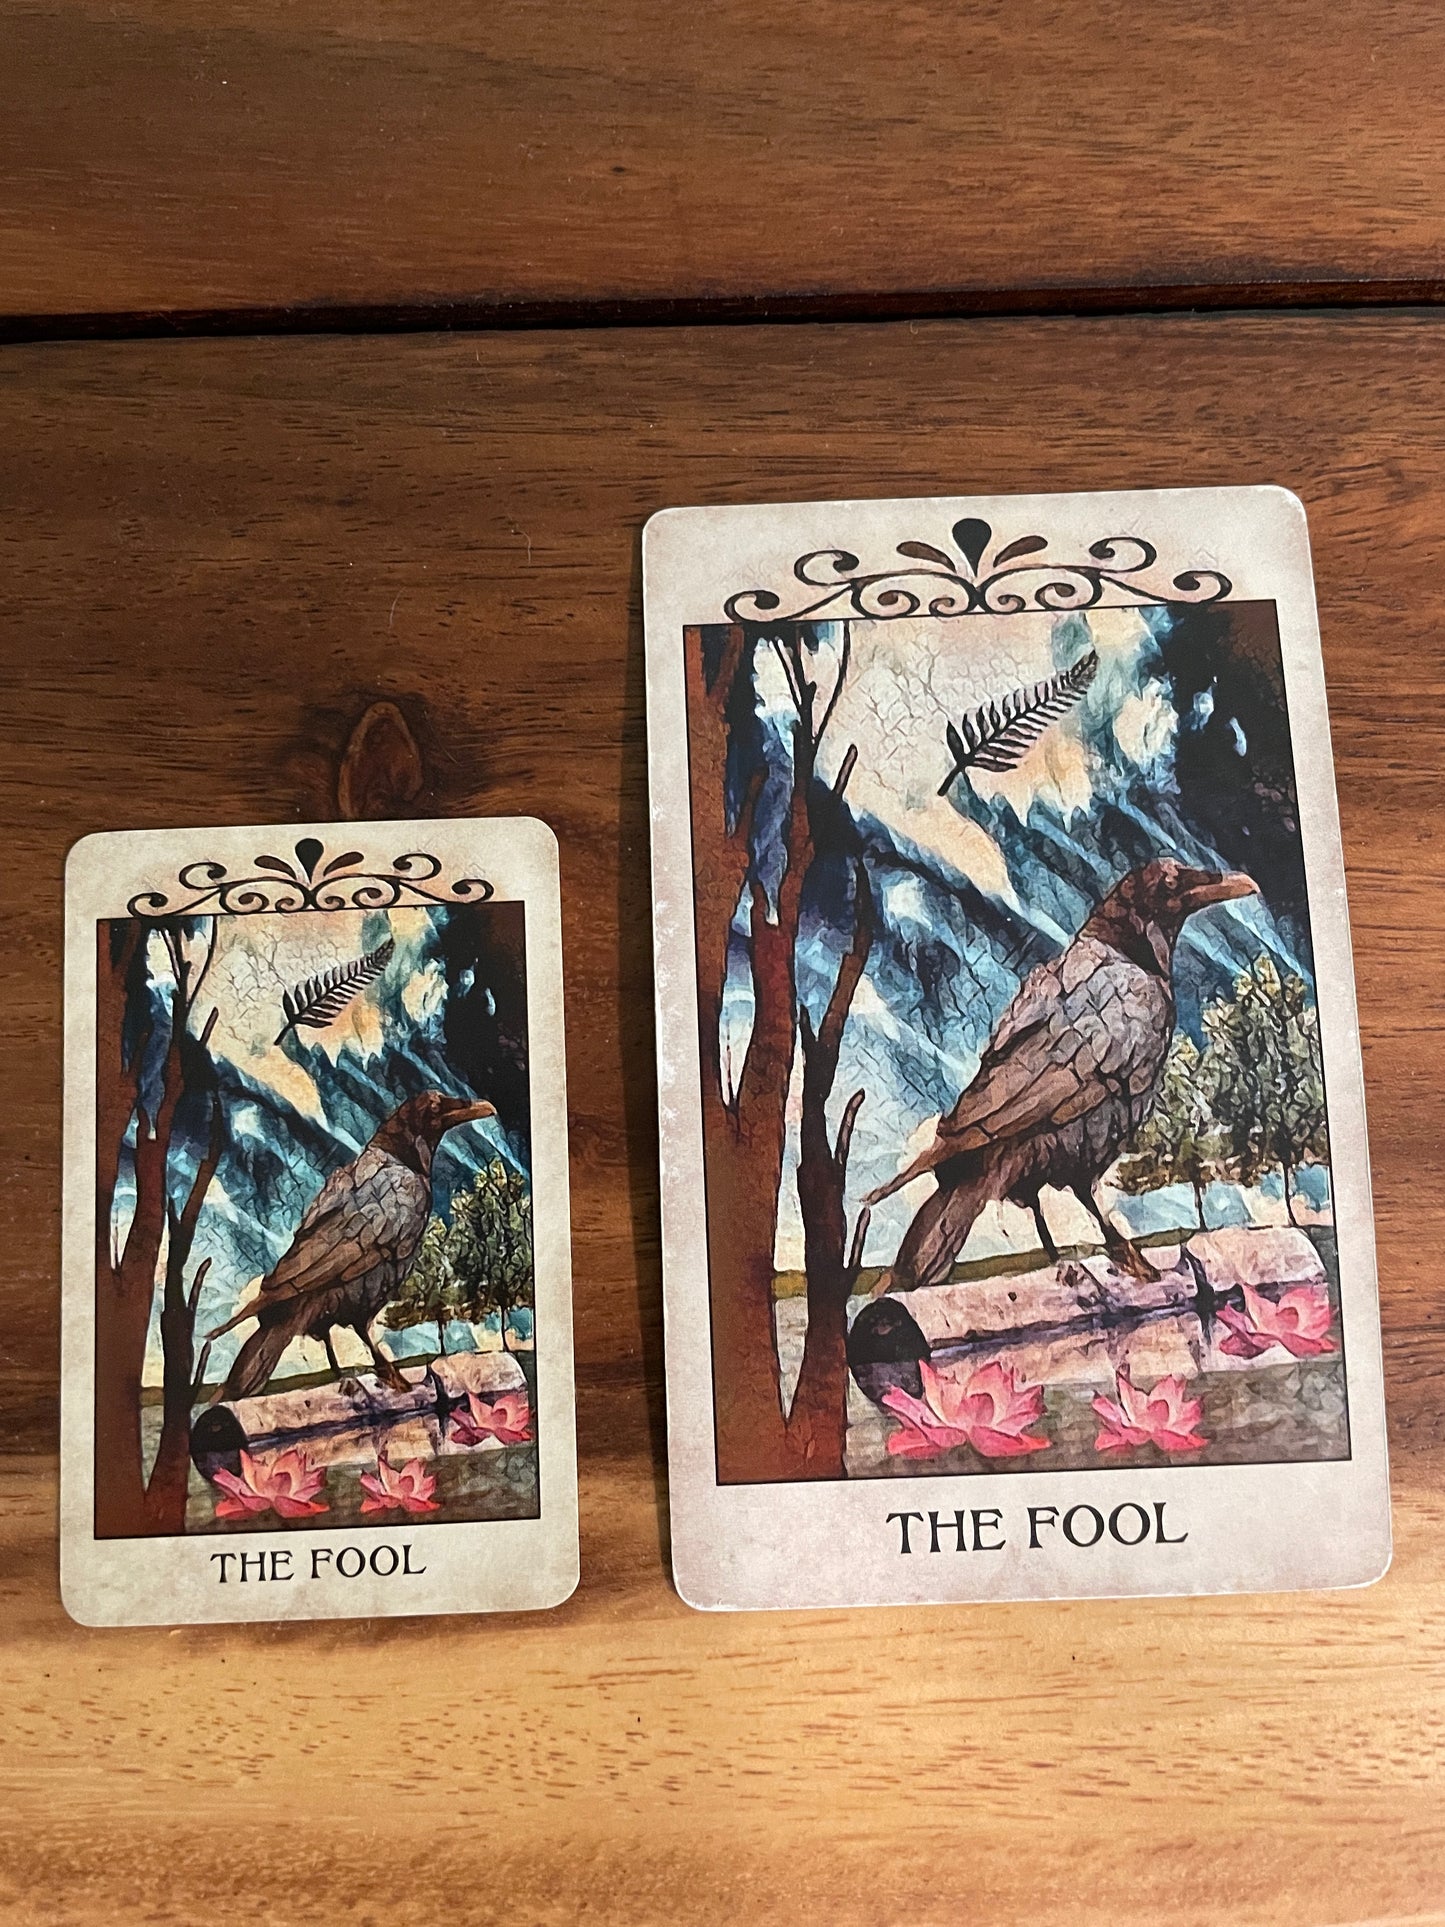 Crow Tarot - Pocket Edition SPECIAL (Ships LATE AUGUST)